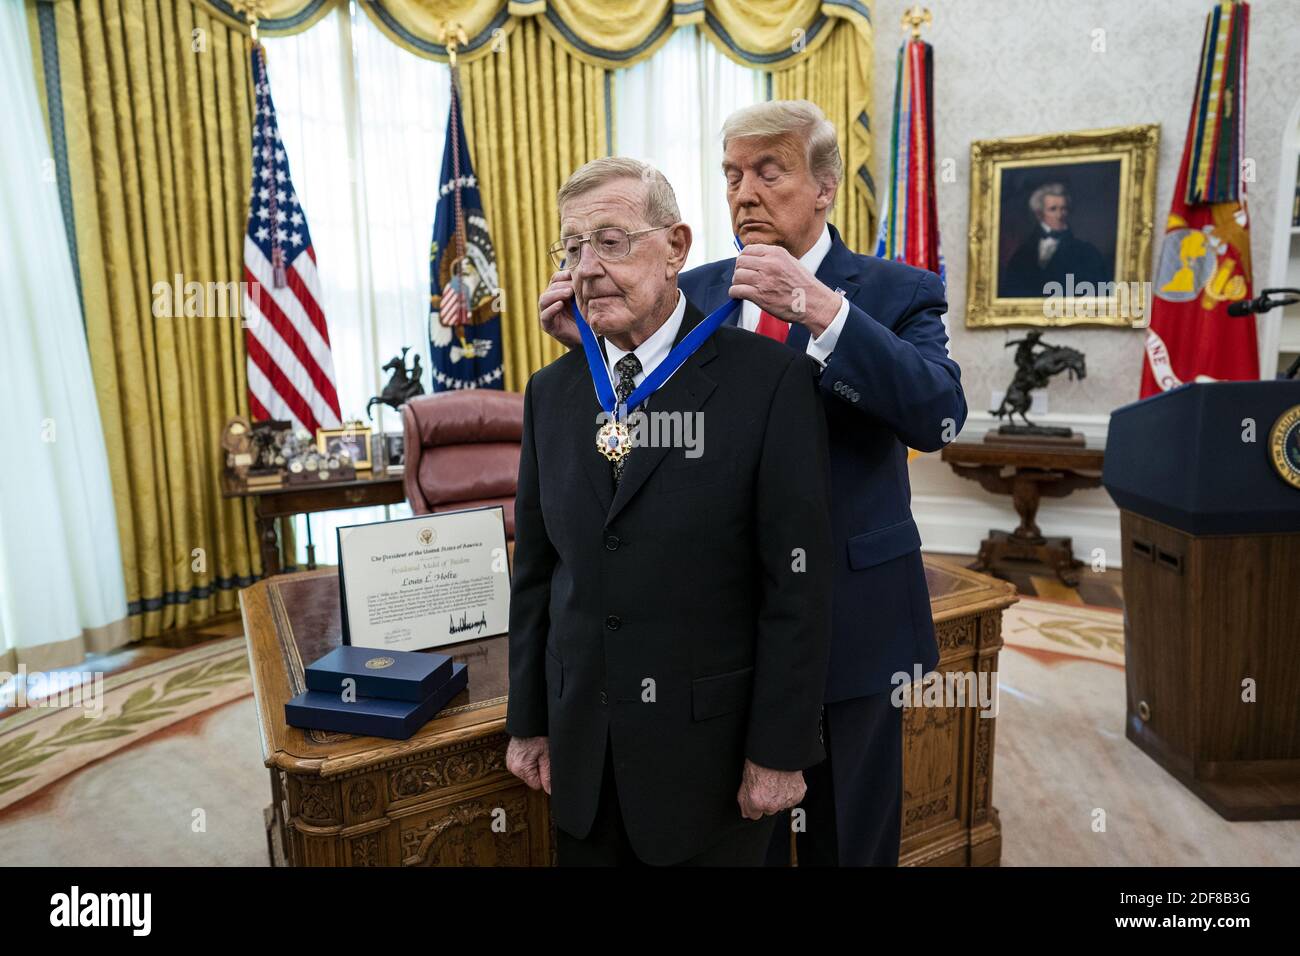 Washington, United States. 03rd Dec, 2020. President Donald Trump presents the Medal of Freedom to Lou Holtz in the Oval Office at the White House in Washington, DC on Thursday, December 3, 2020. Pool photo by Doug Mills/UPI Credit: UPI/Alamy Live News Stock Photo